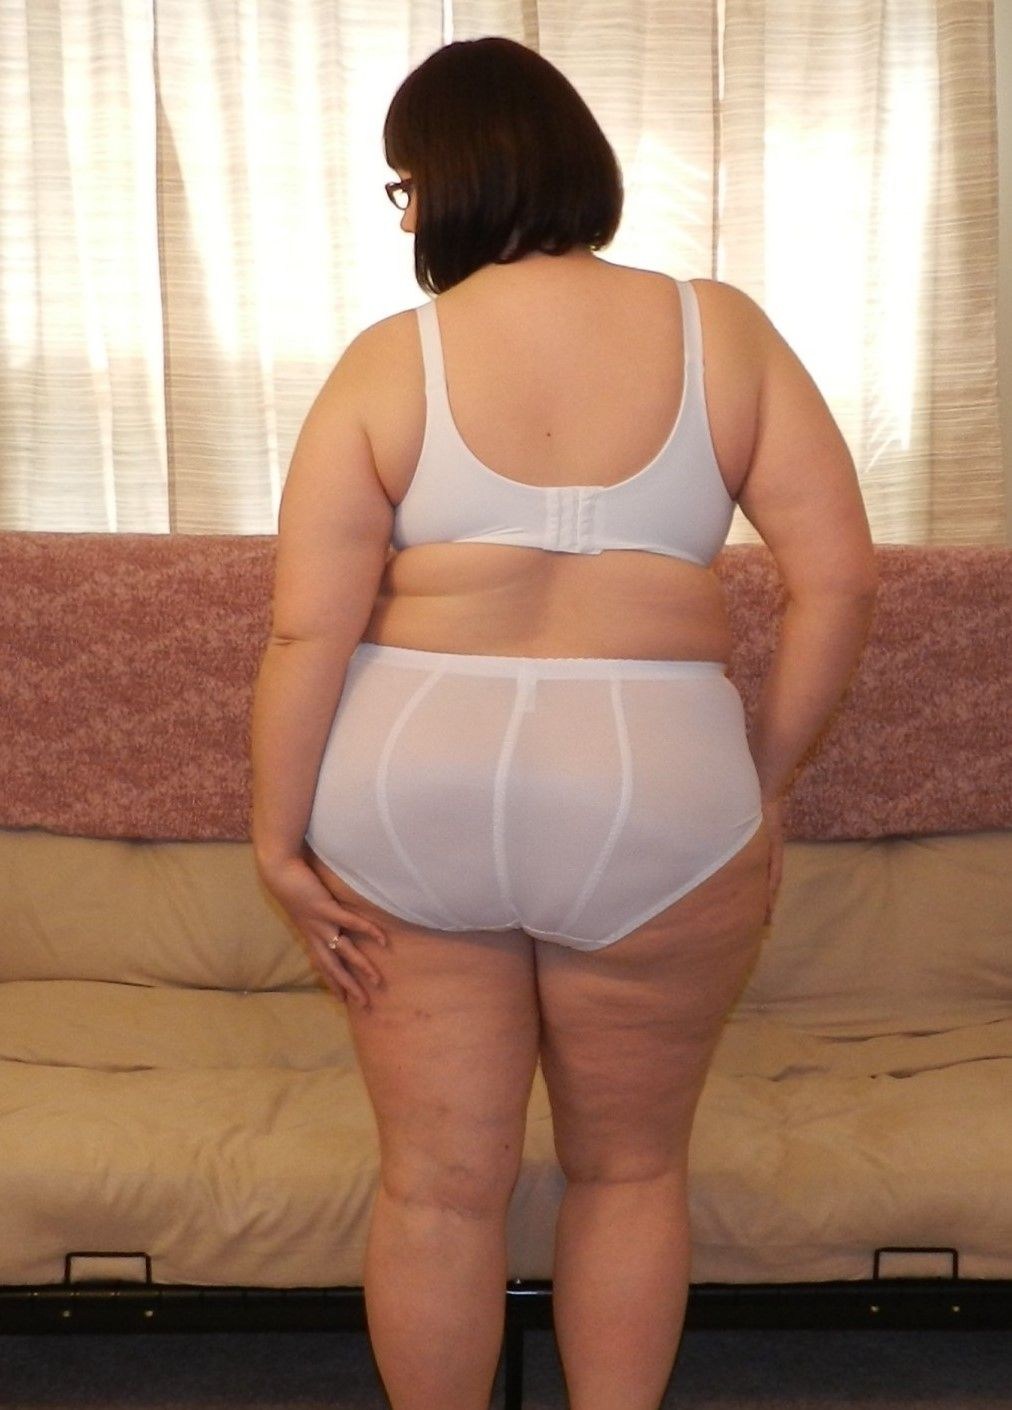 Big Fat Old Lingerie - Fat Old Lady in White Panties (43 photos) - motherless porn pics